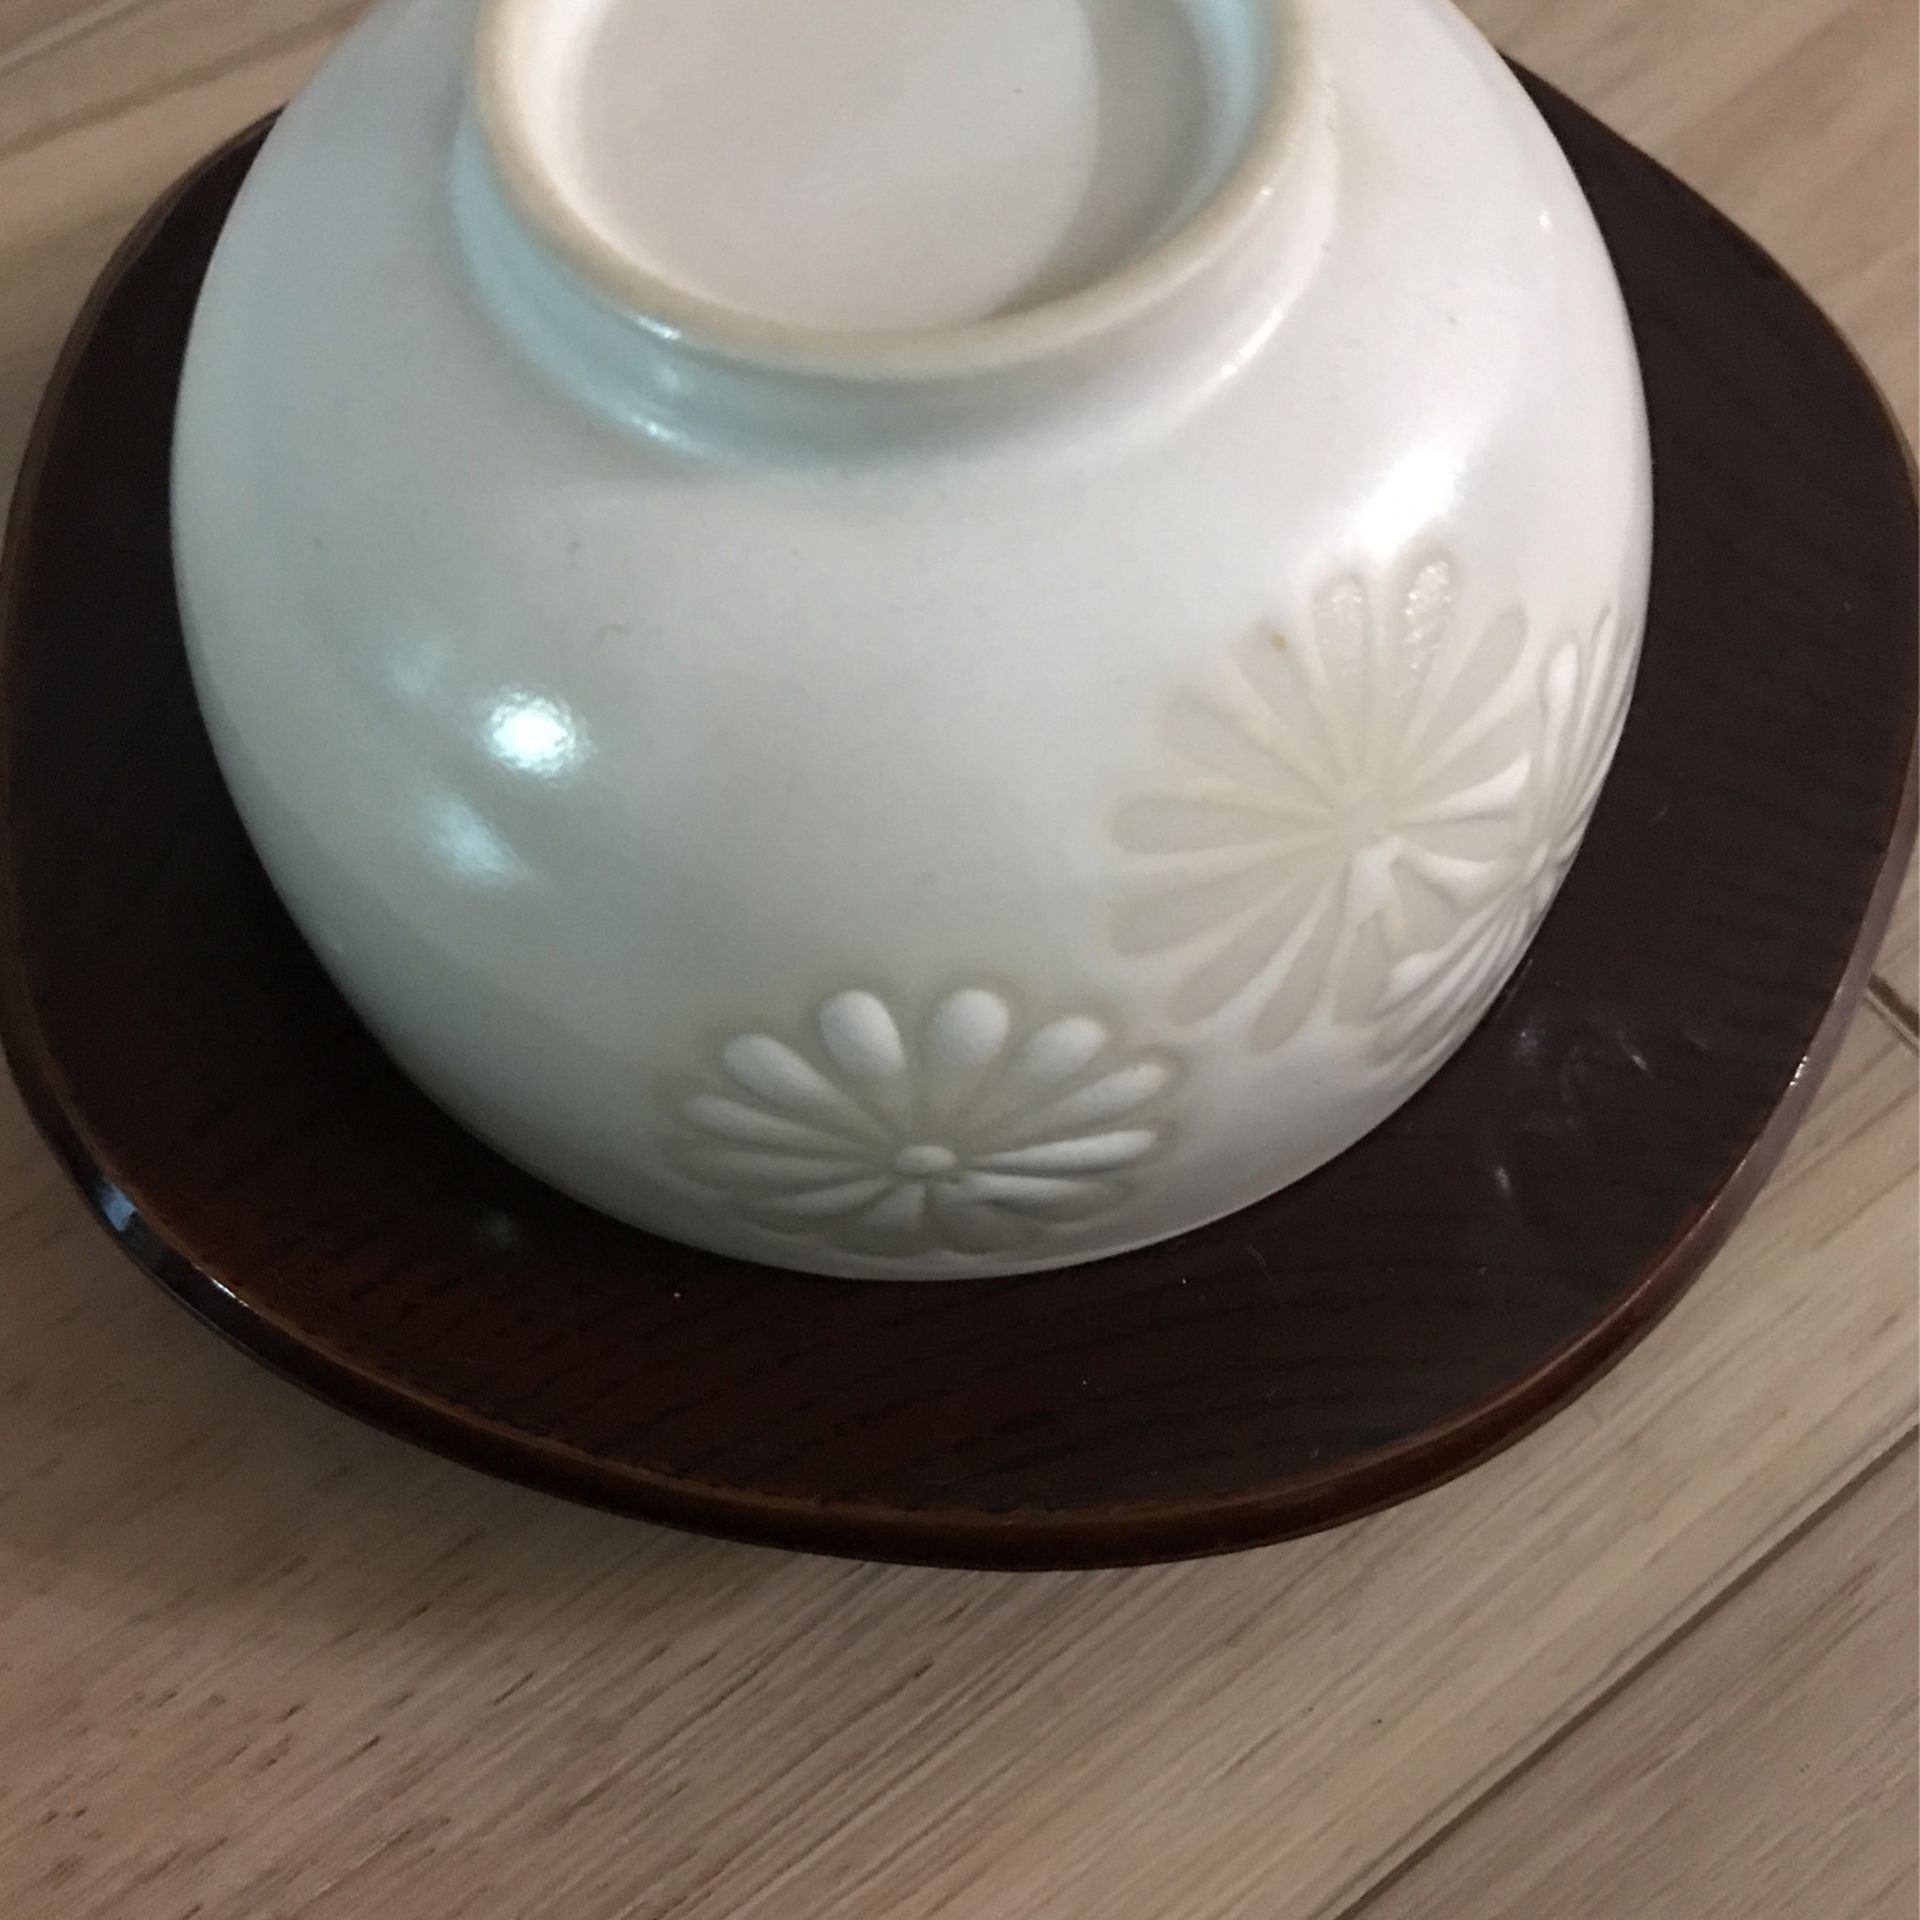 Traditional Japanese Tea Cup With Saucers